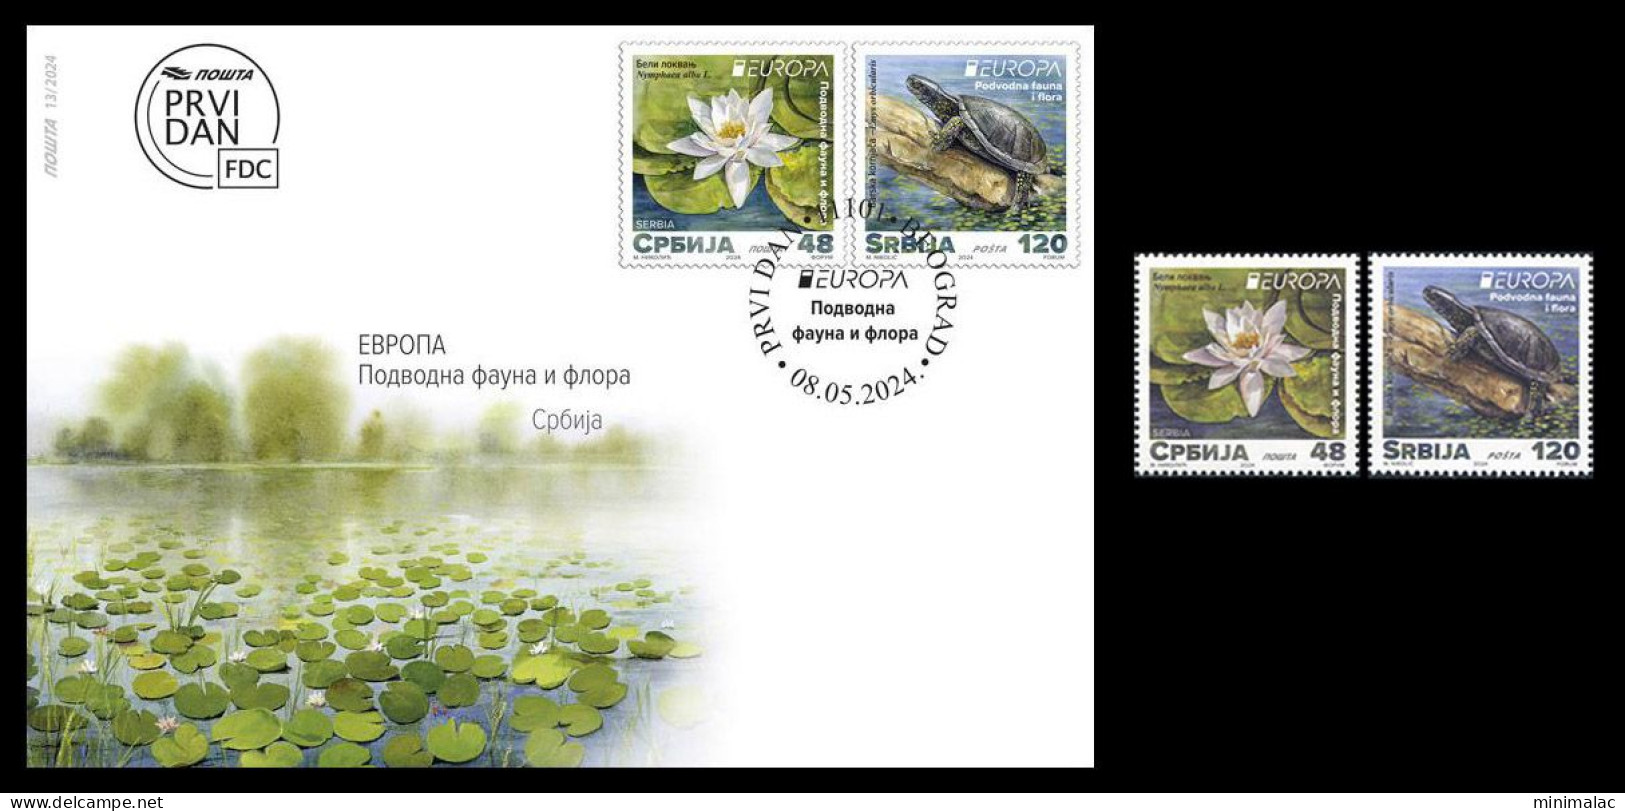 Serbia 2024. EUROPA, Underwater Fauna And Flora, Water Lily, Turtle, FDC + Stamp, MNH - Serbia